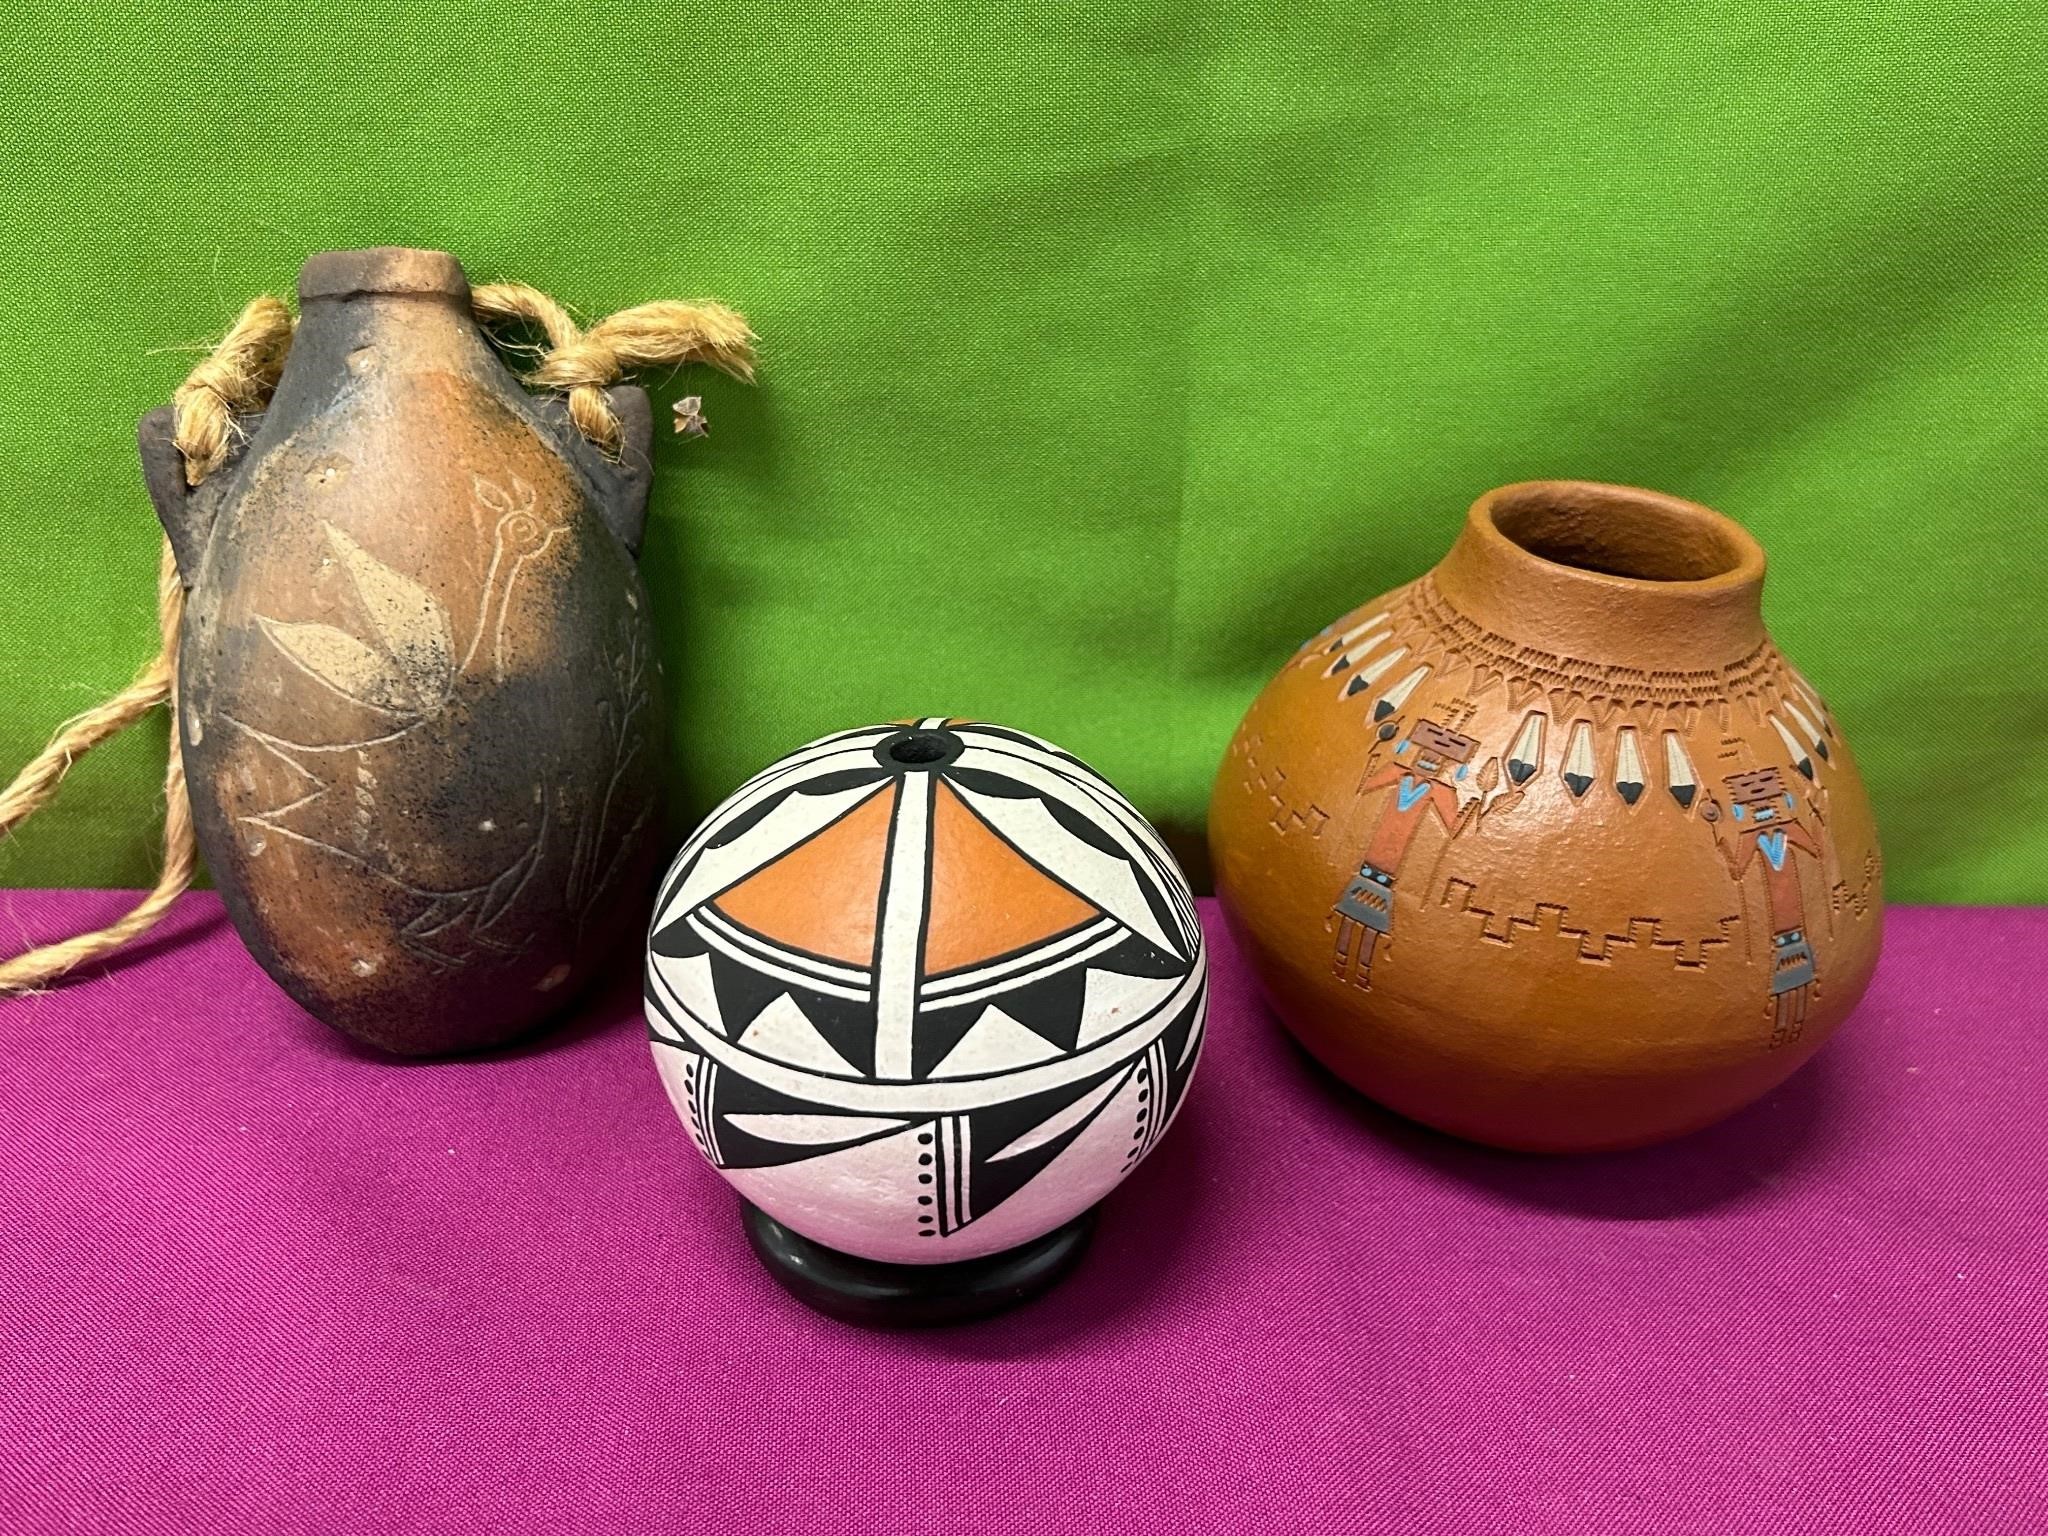 Acoma, Dineh + Signed Pottery Vases